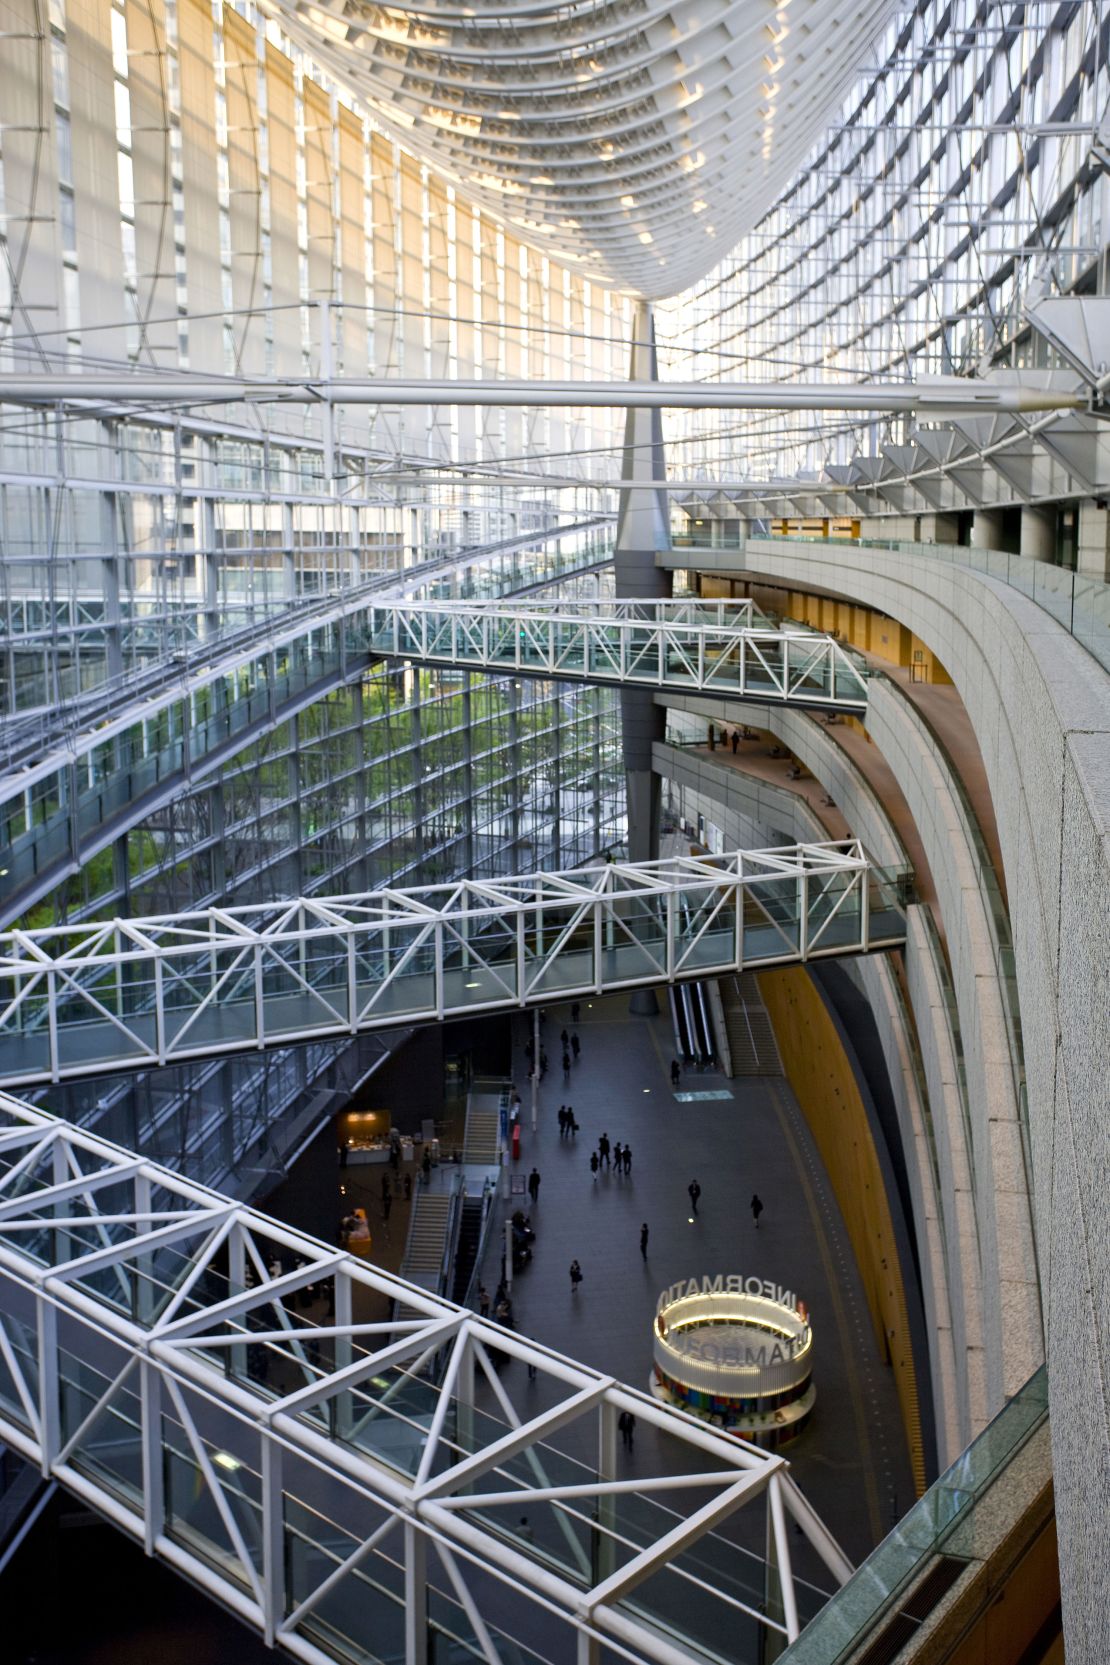 The multi-award winning Tokyo International Forum in Japan was built to accomodate everything from performances to conventions and receptions.